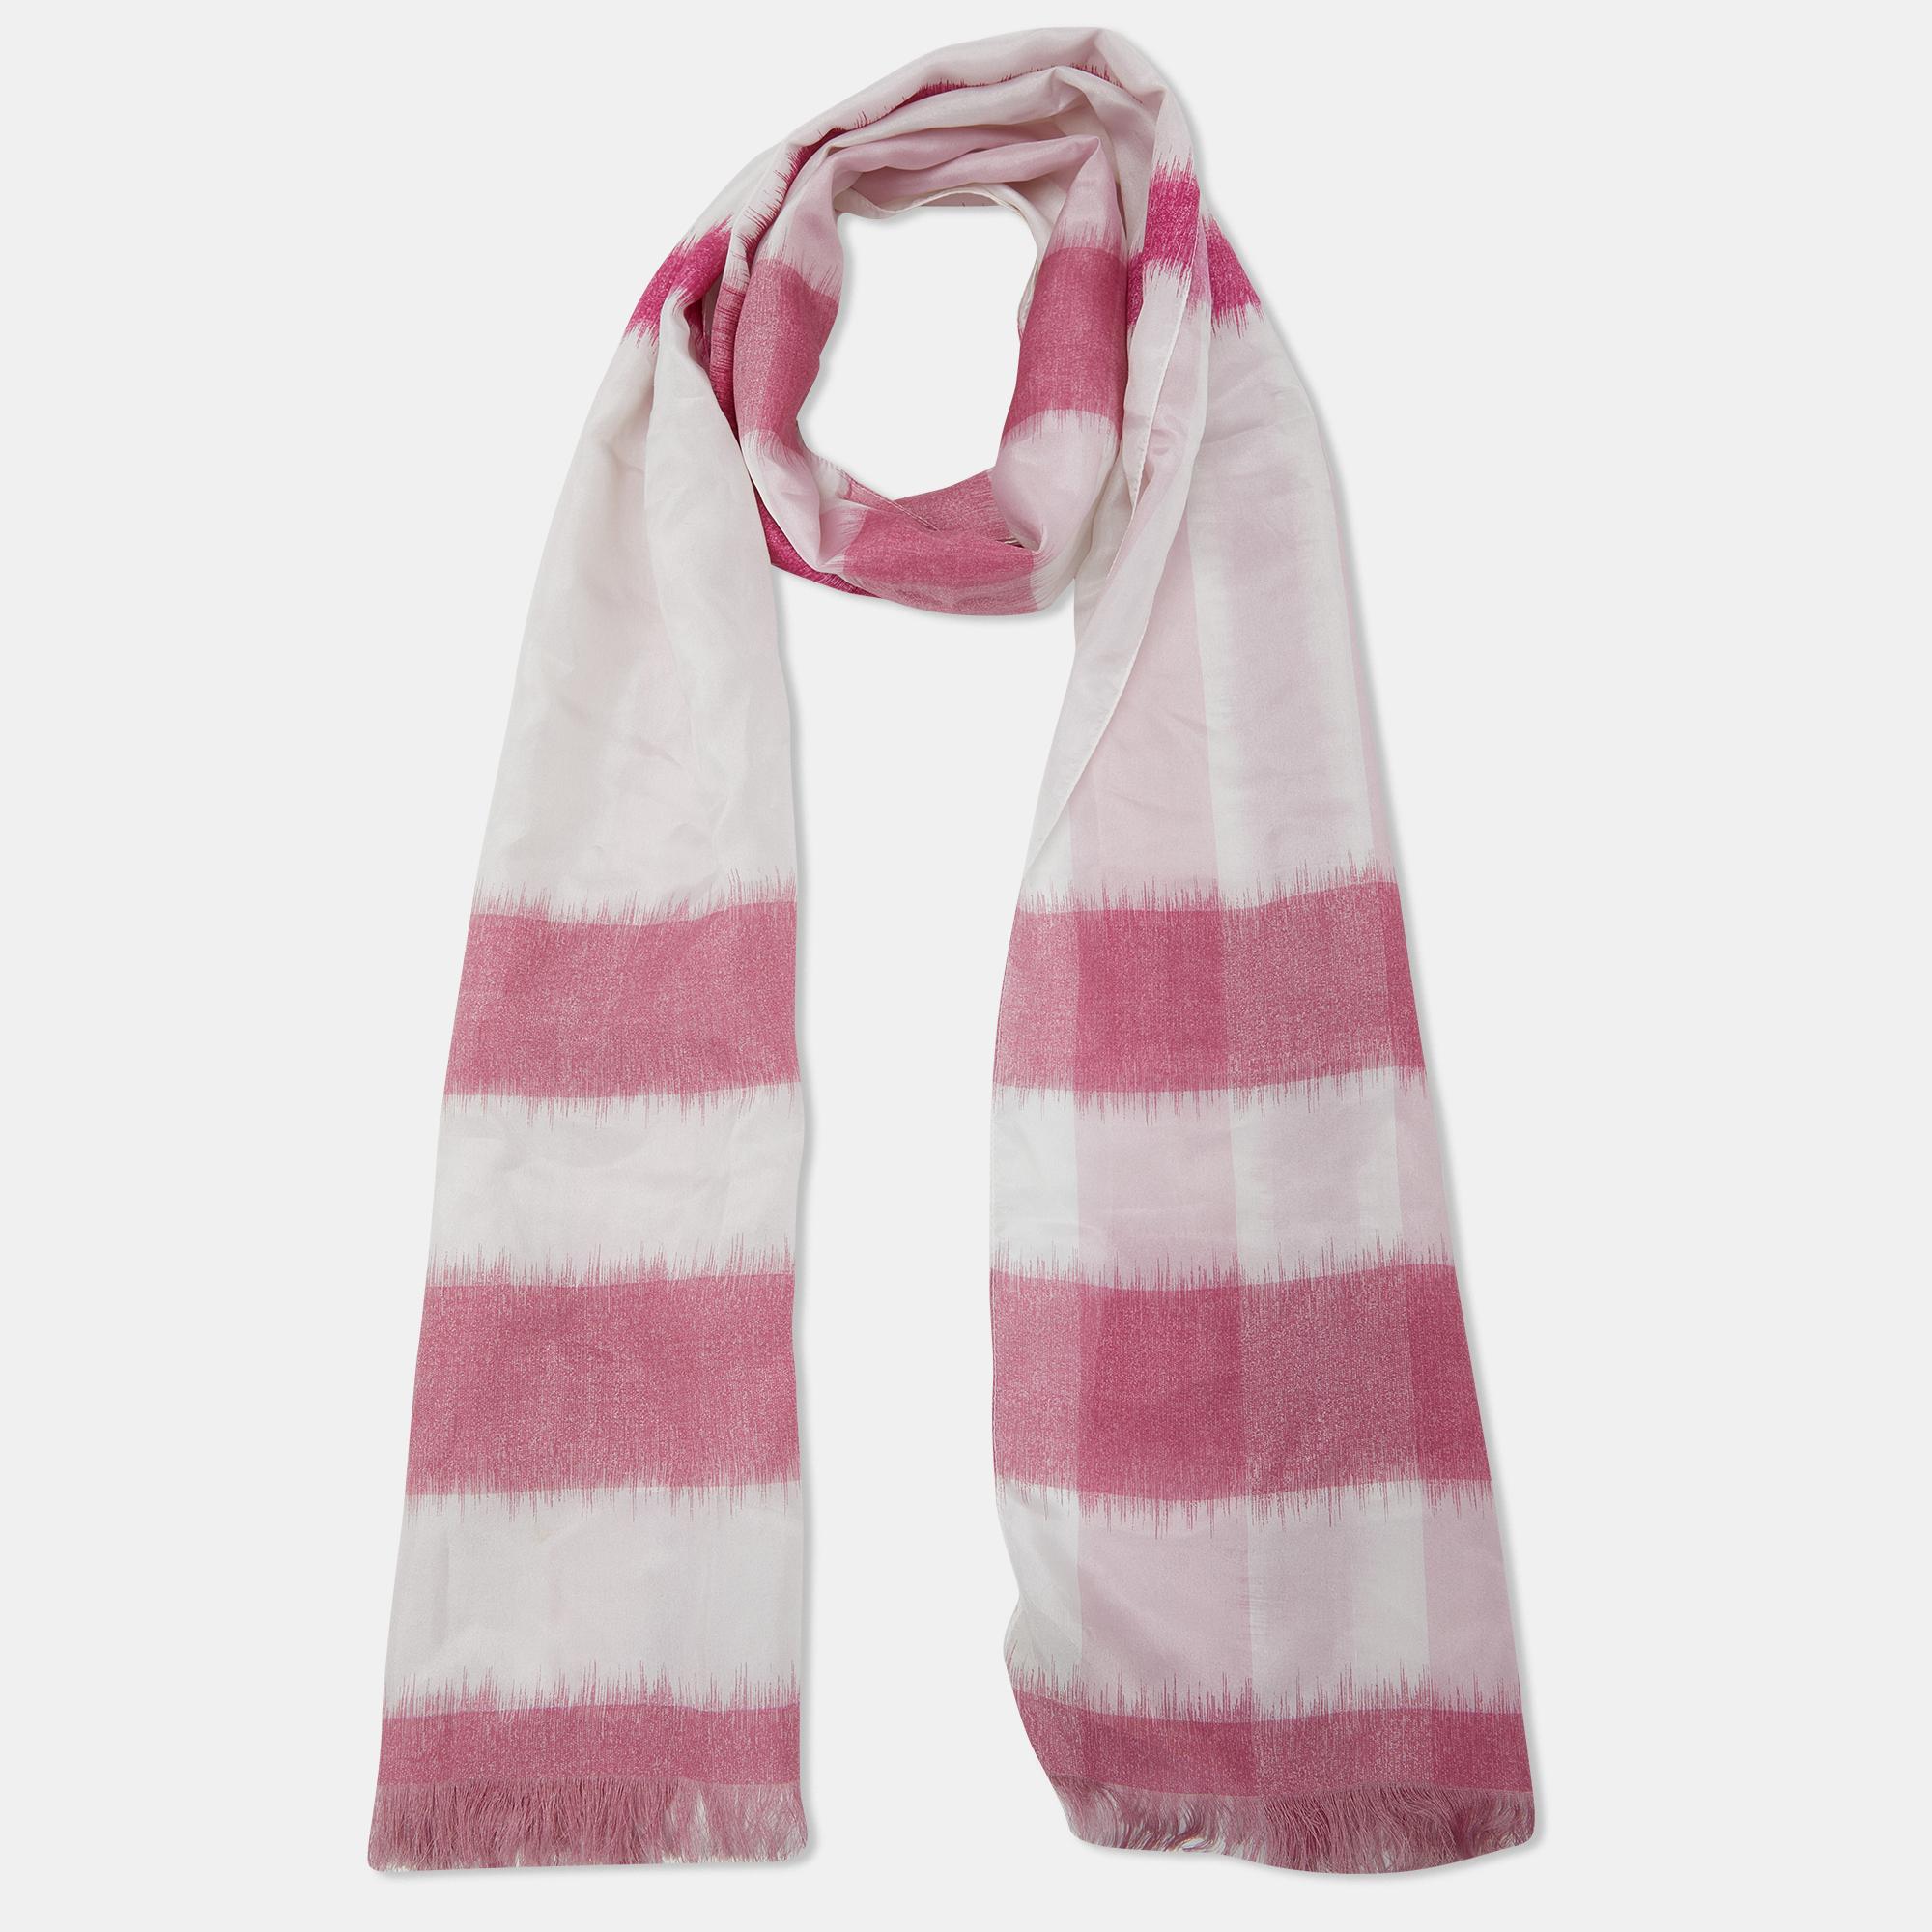 Made from quality fabric, this Burberry scarf is gorgeous. It is easy to style and luxurious in appeal.

